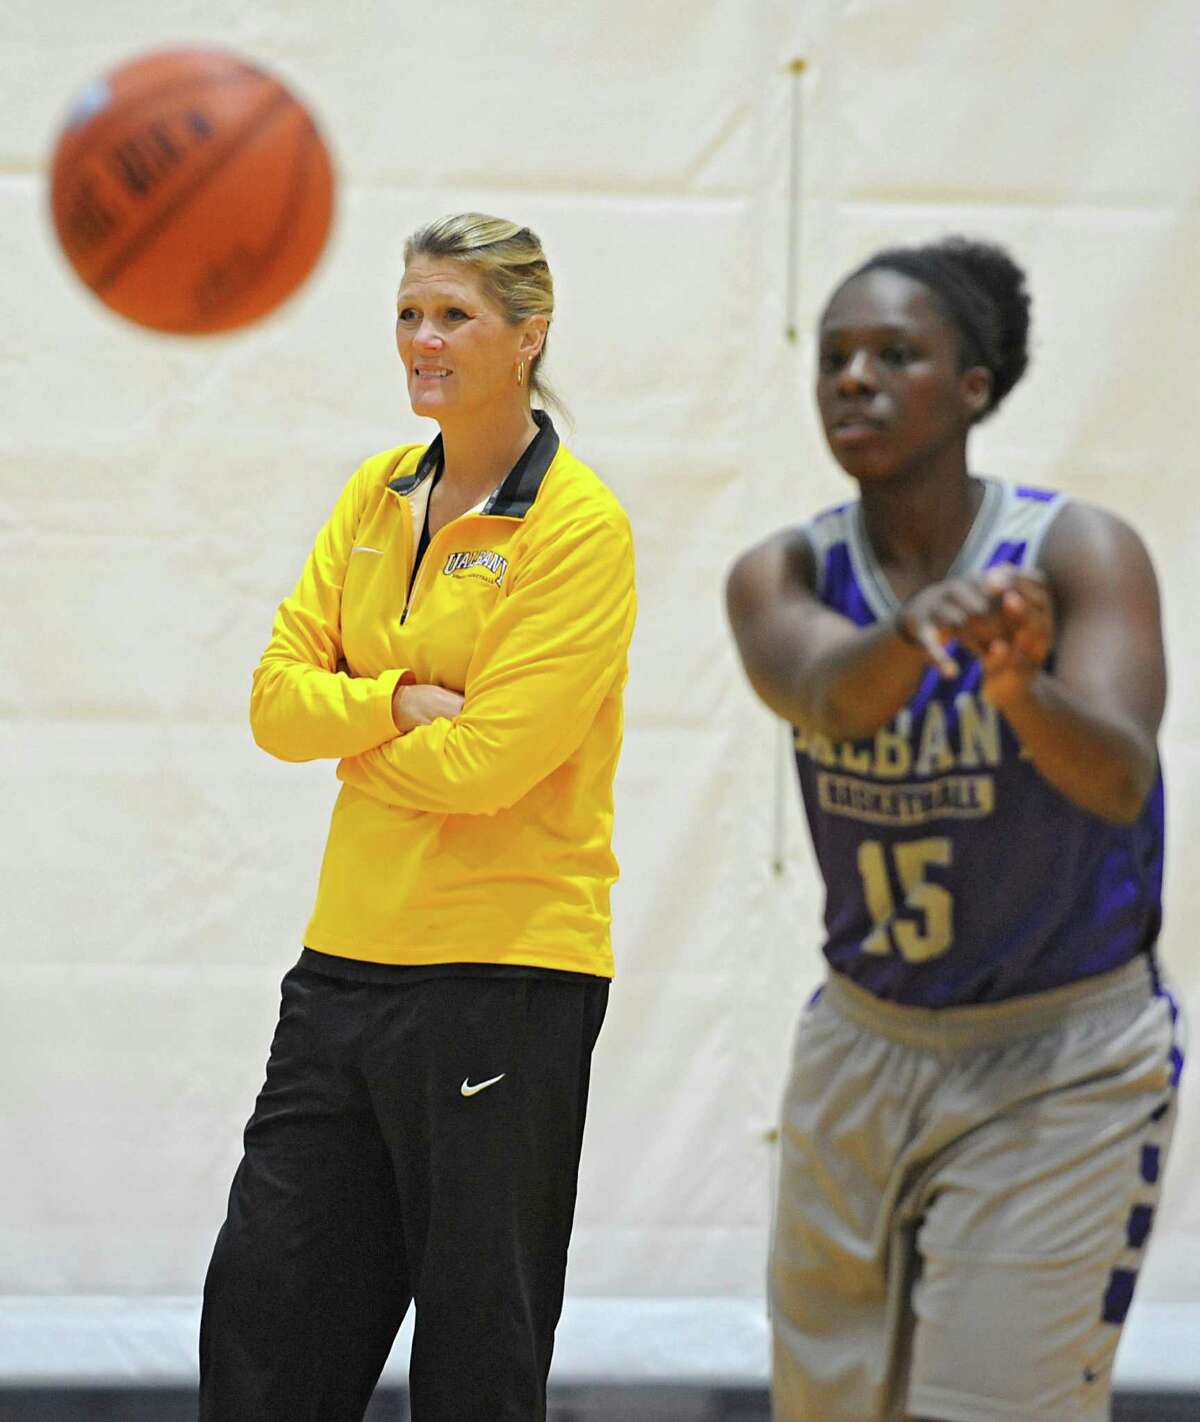 UAlbany women's basketball coach Katie Abrahamson-Henderson, left, watches her team during practice on Thursday, Oct. 15, 2015 at the SEFCU Arena in Albany, N.Y. (Lori Van Buren / Times Union)